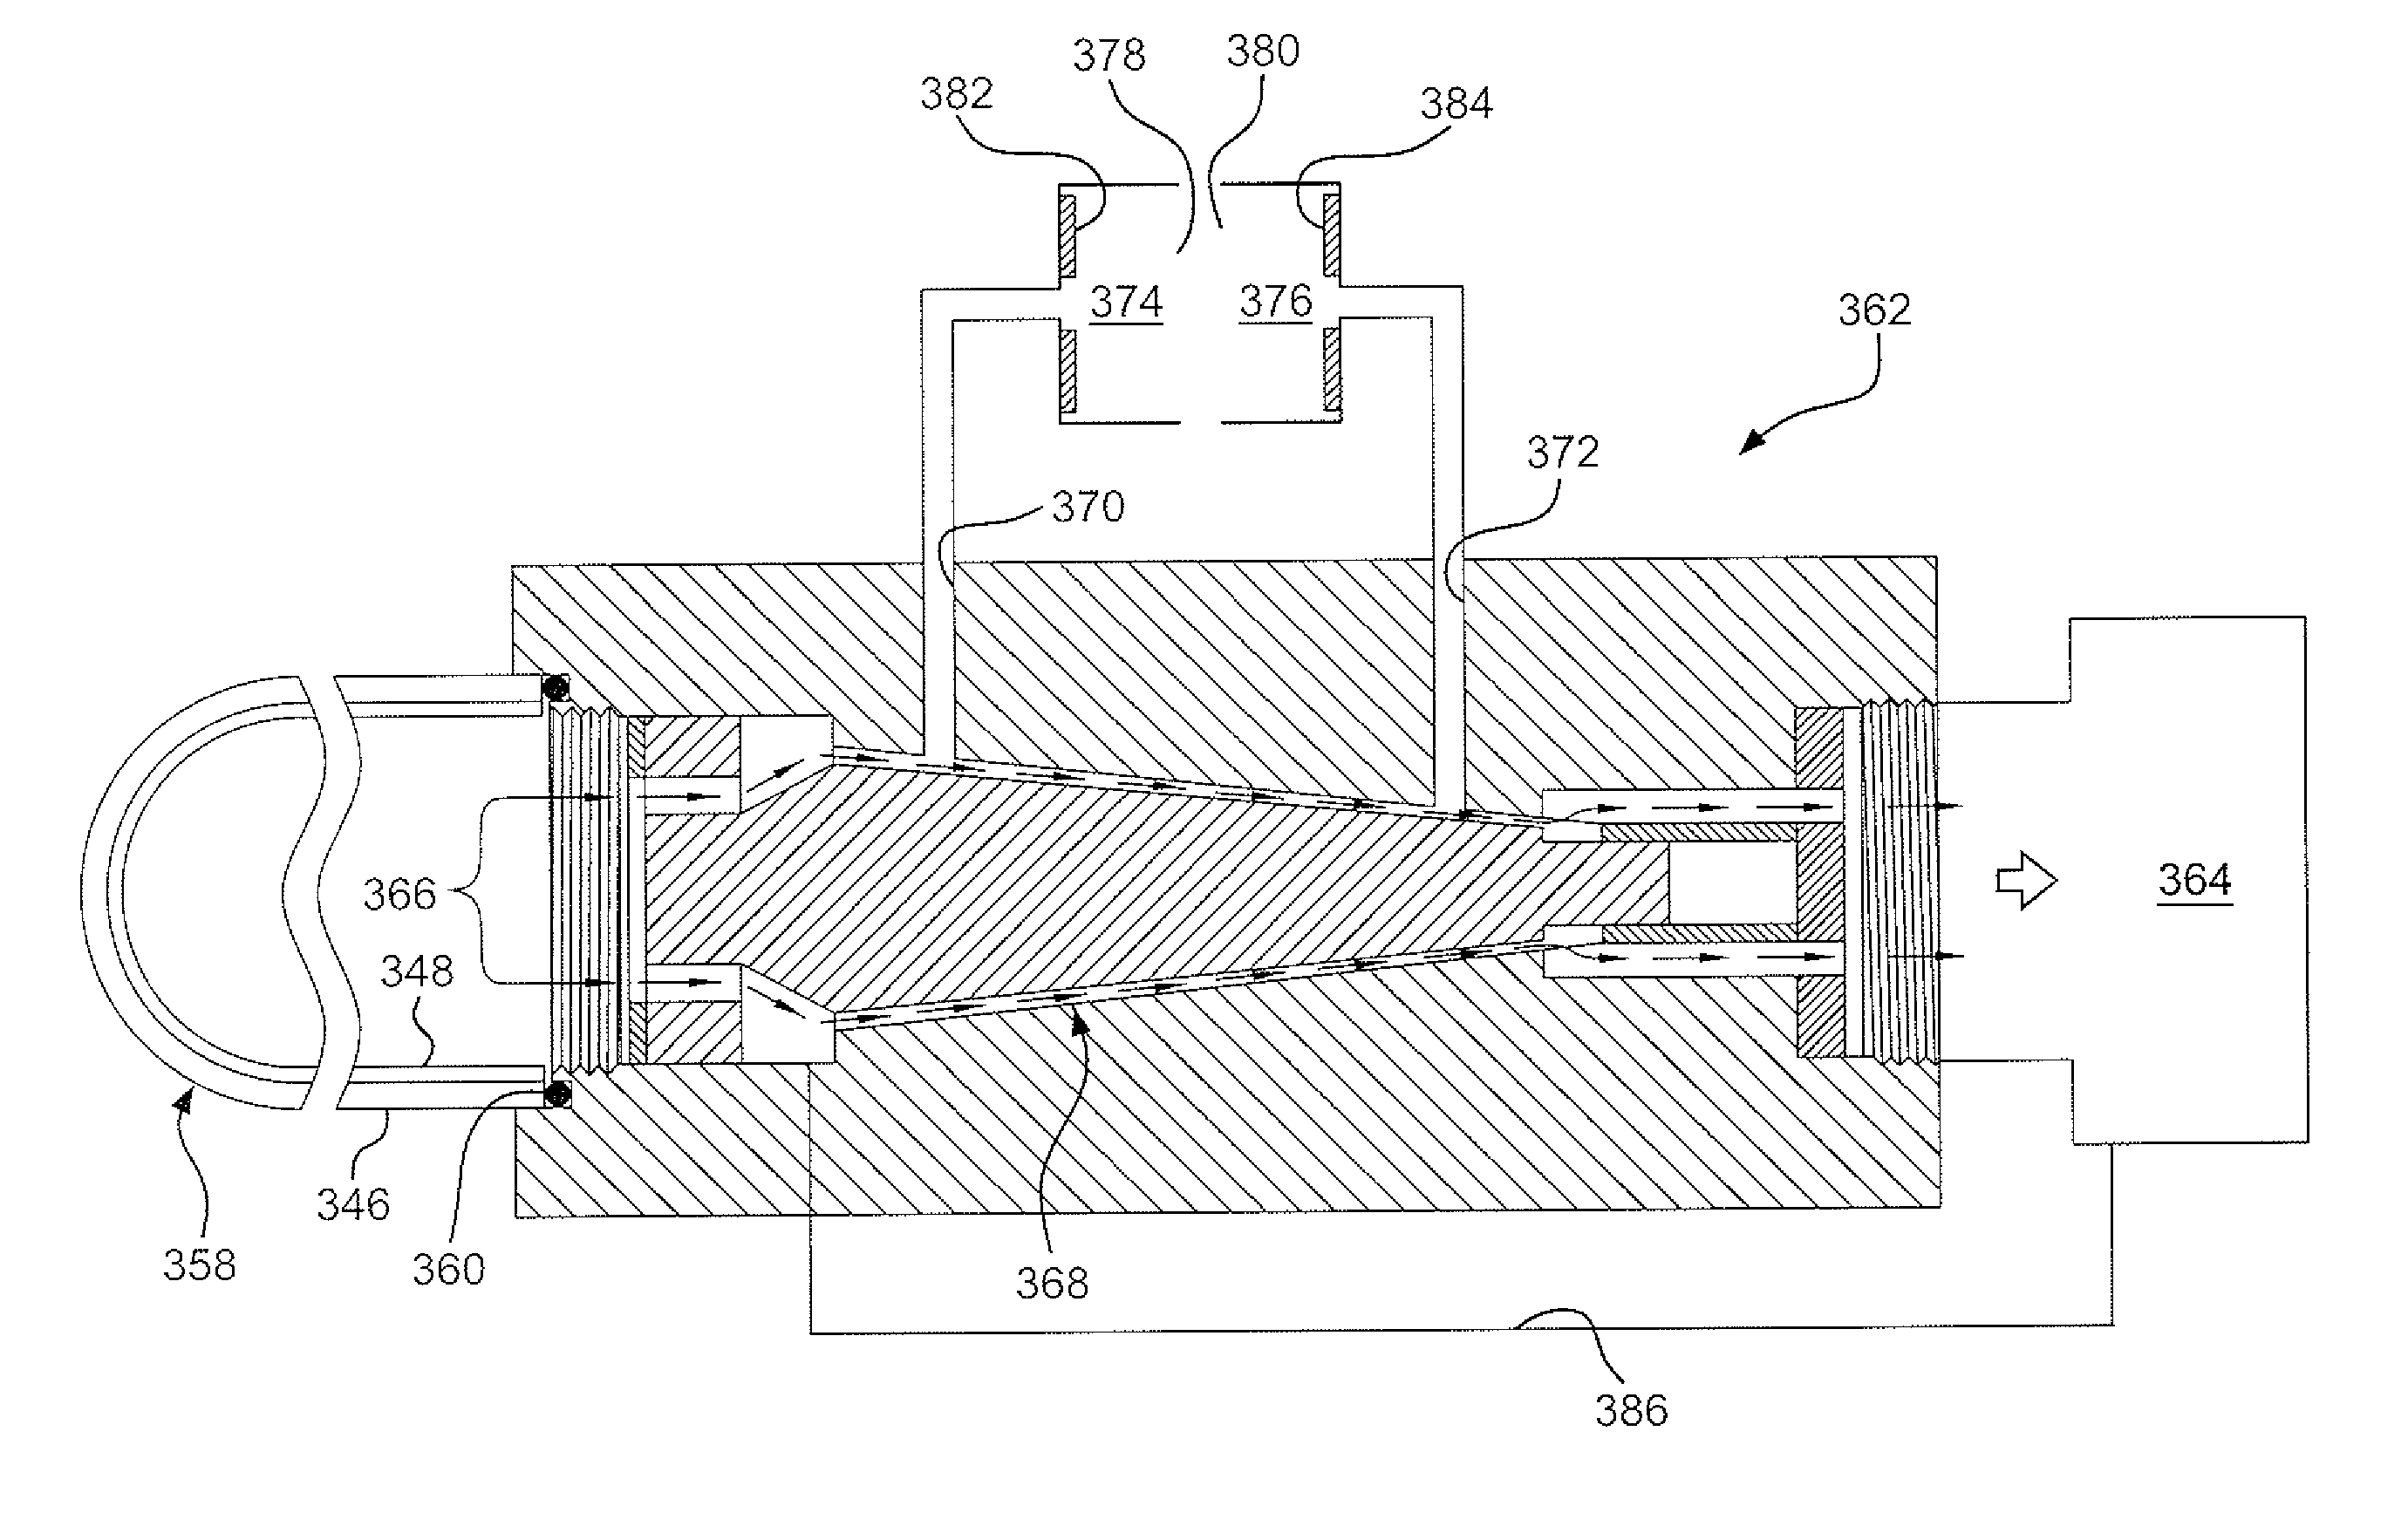 Vessel inspection apparatus and methods